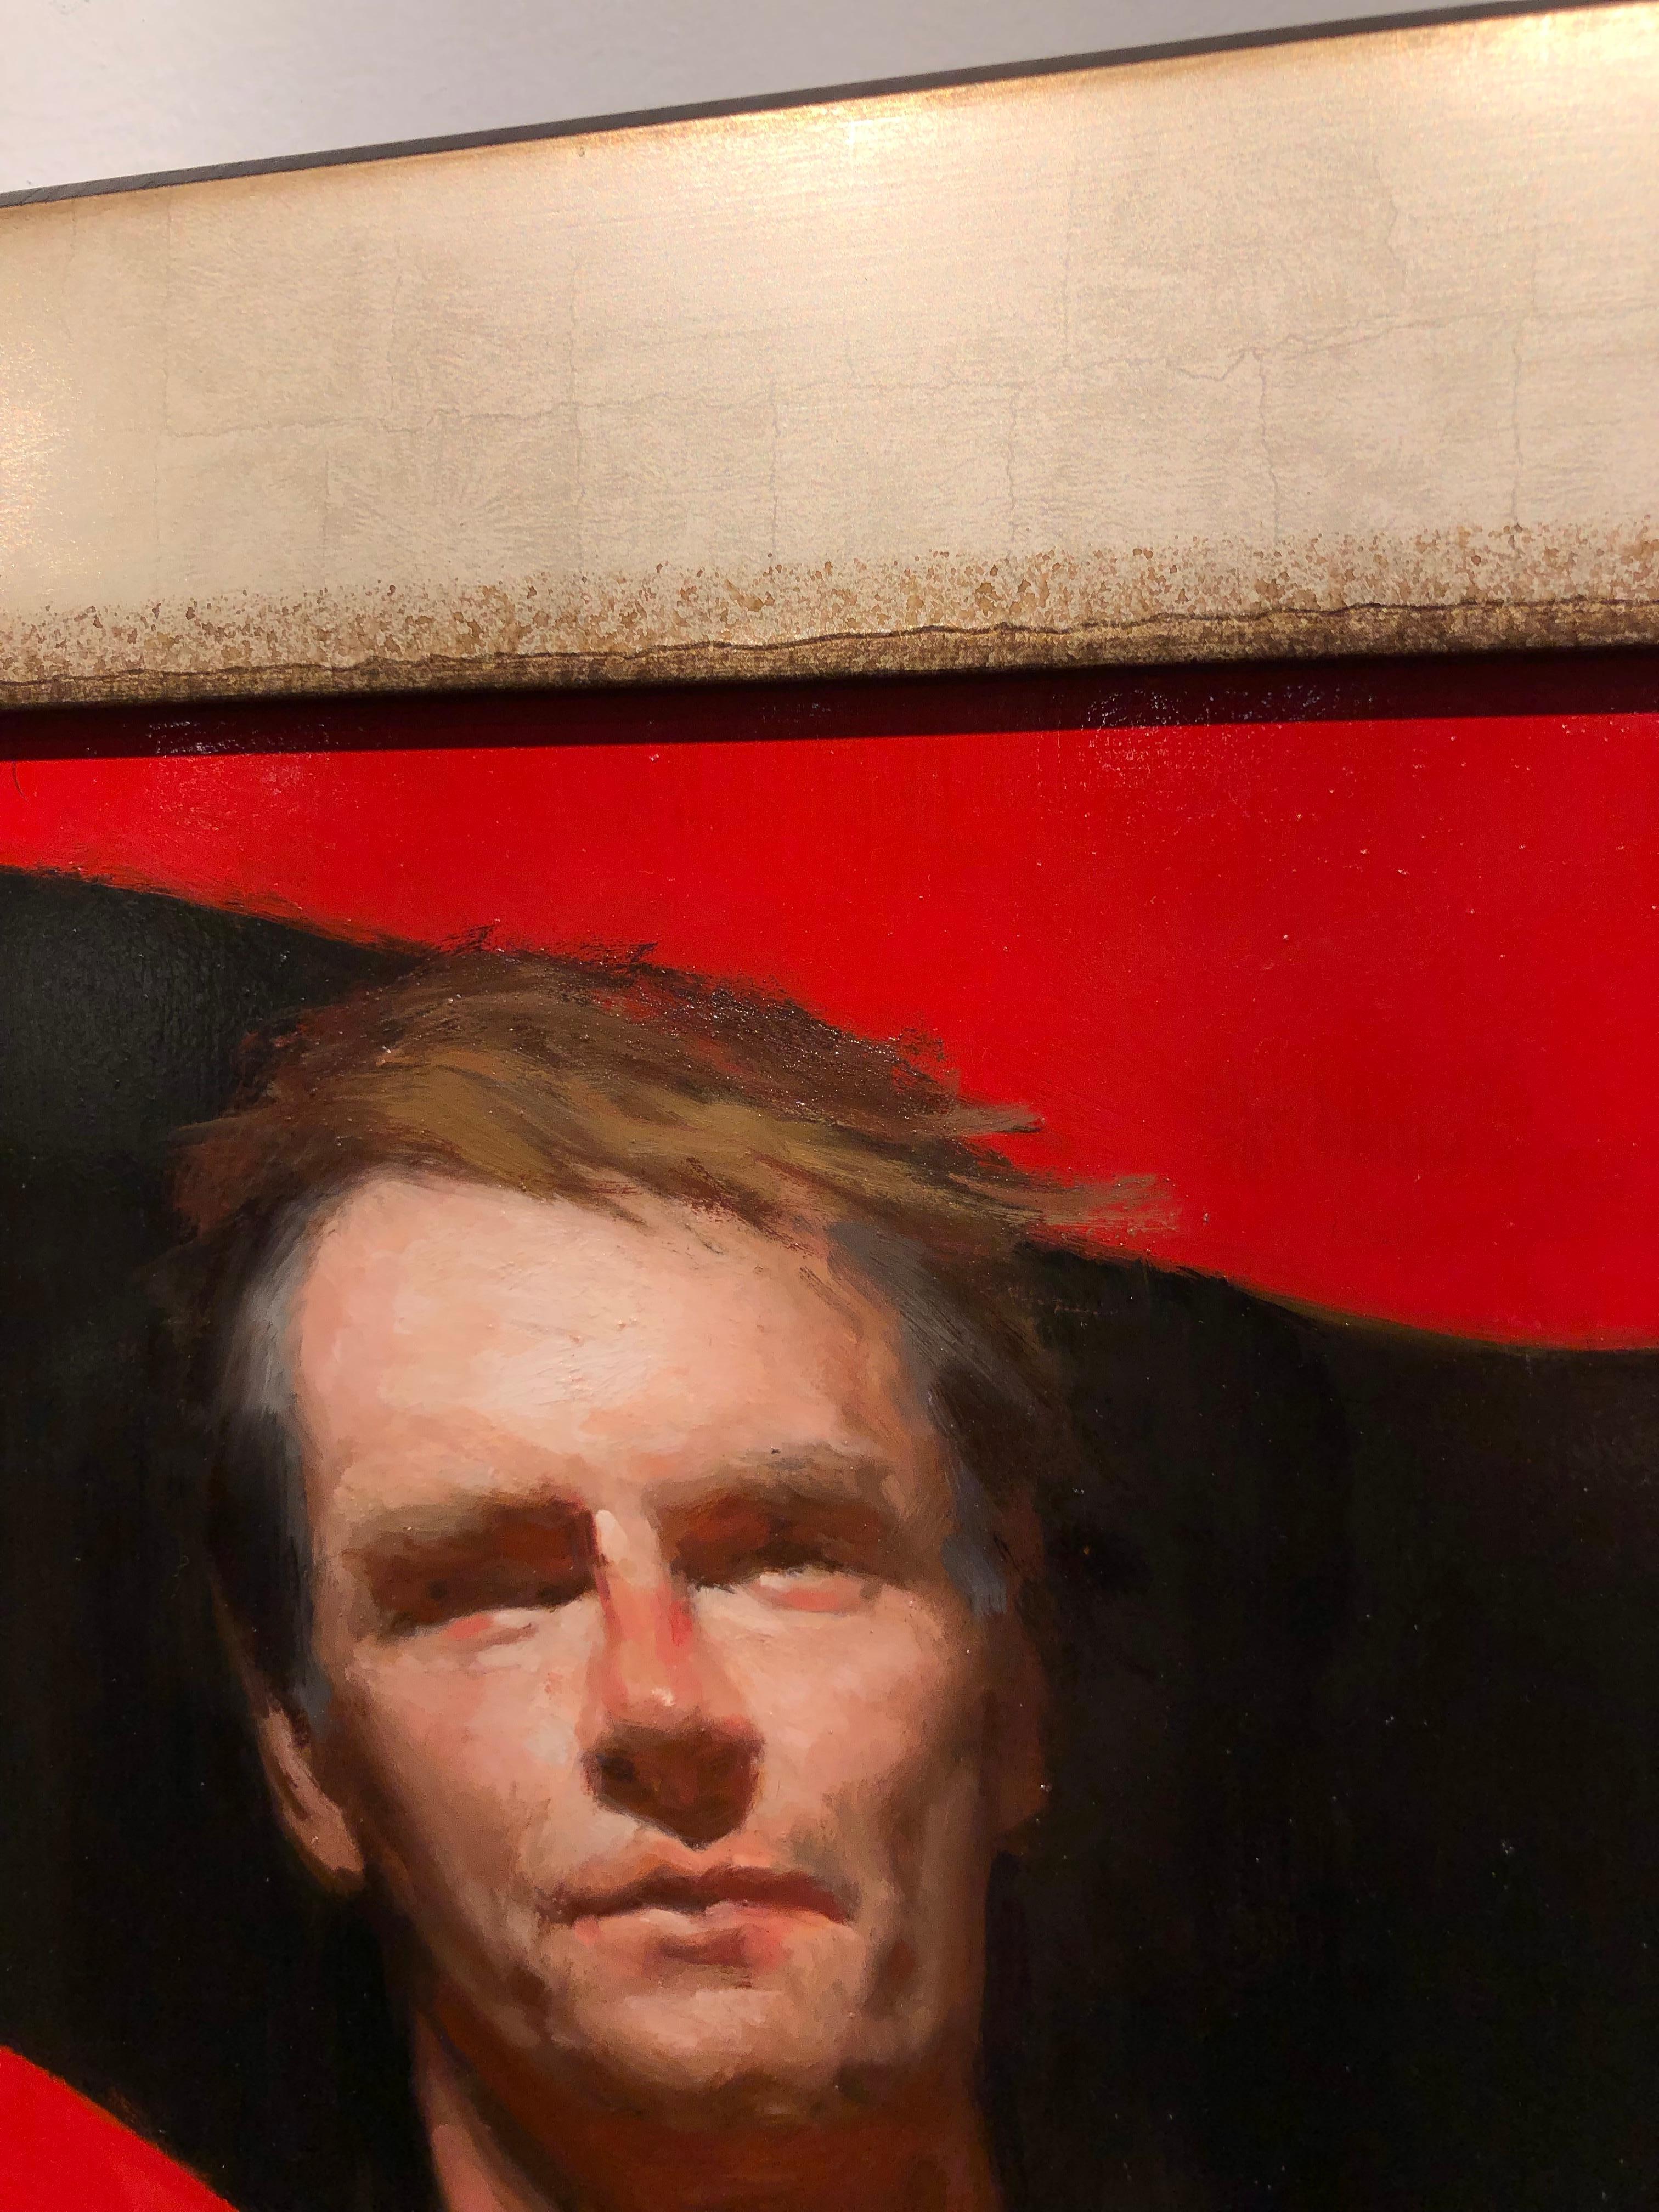 7B - Red Background with Shirtless Male and Black Seven, Oil on Panel Painting 6